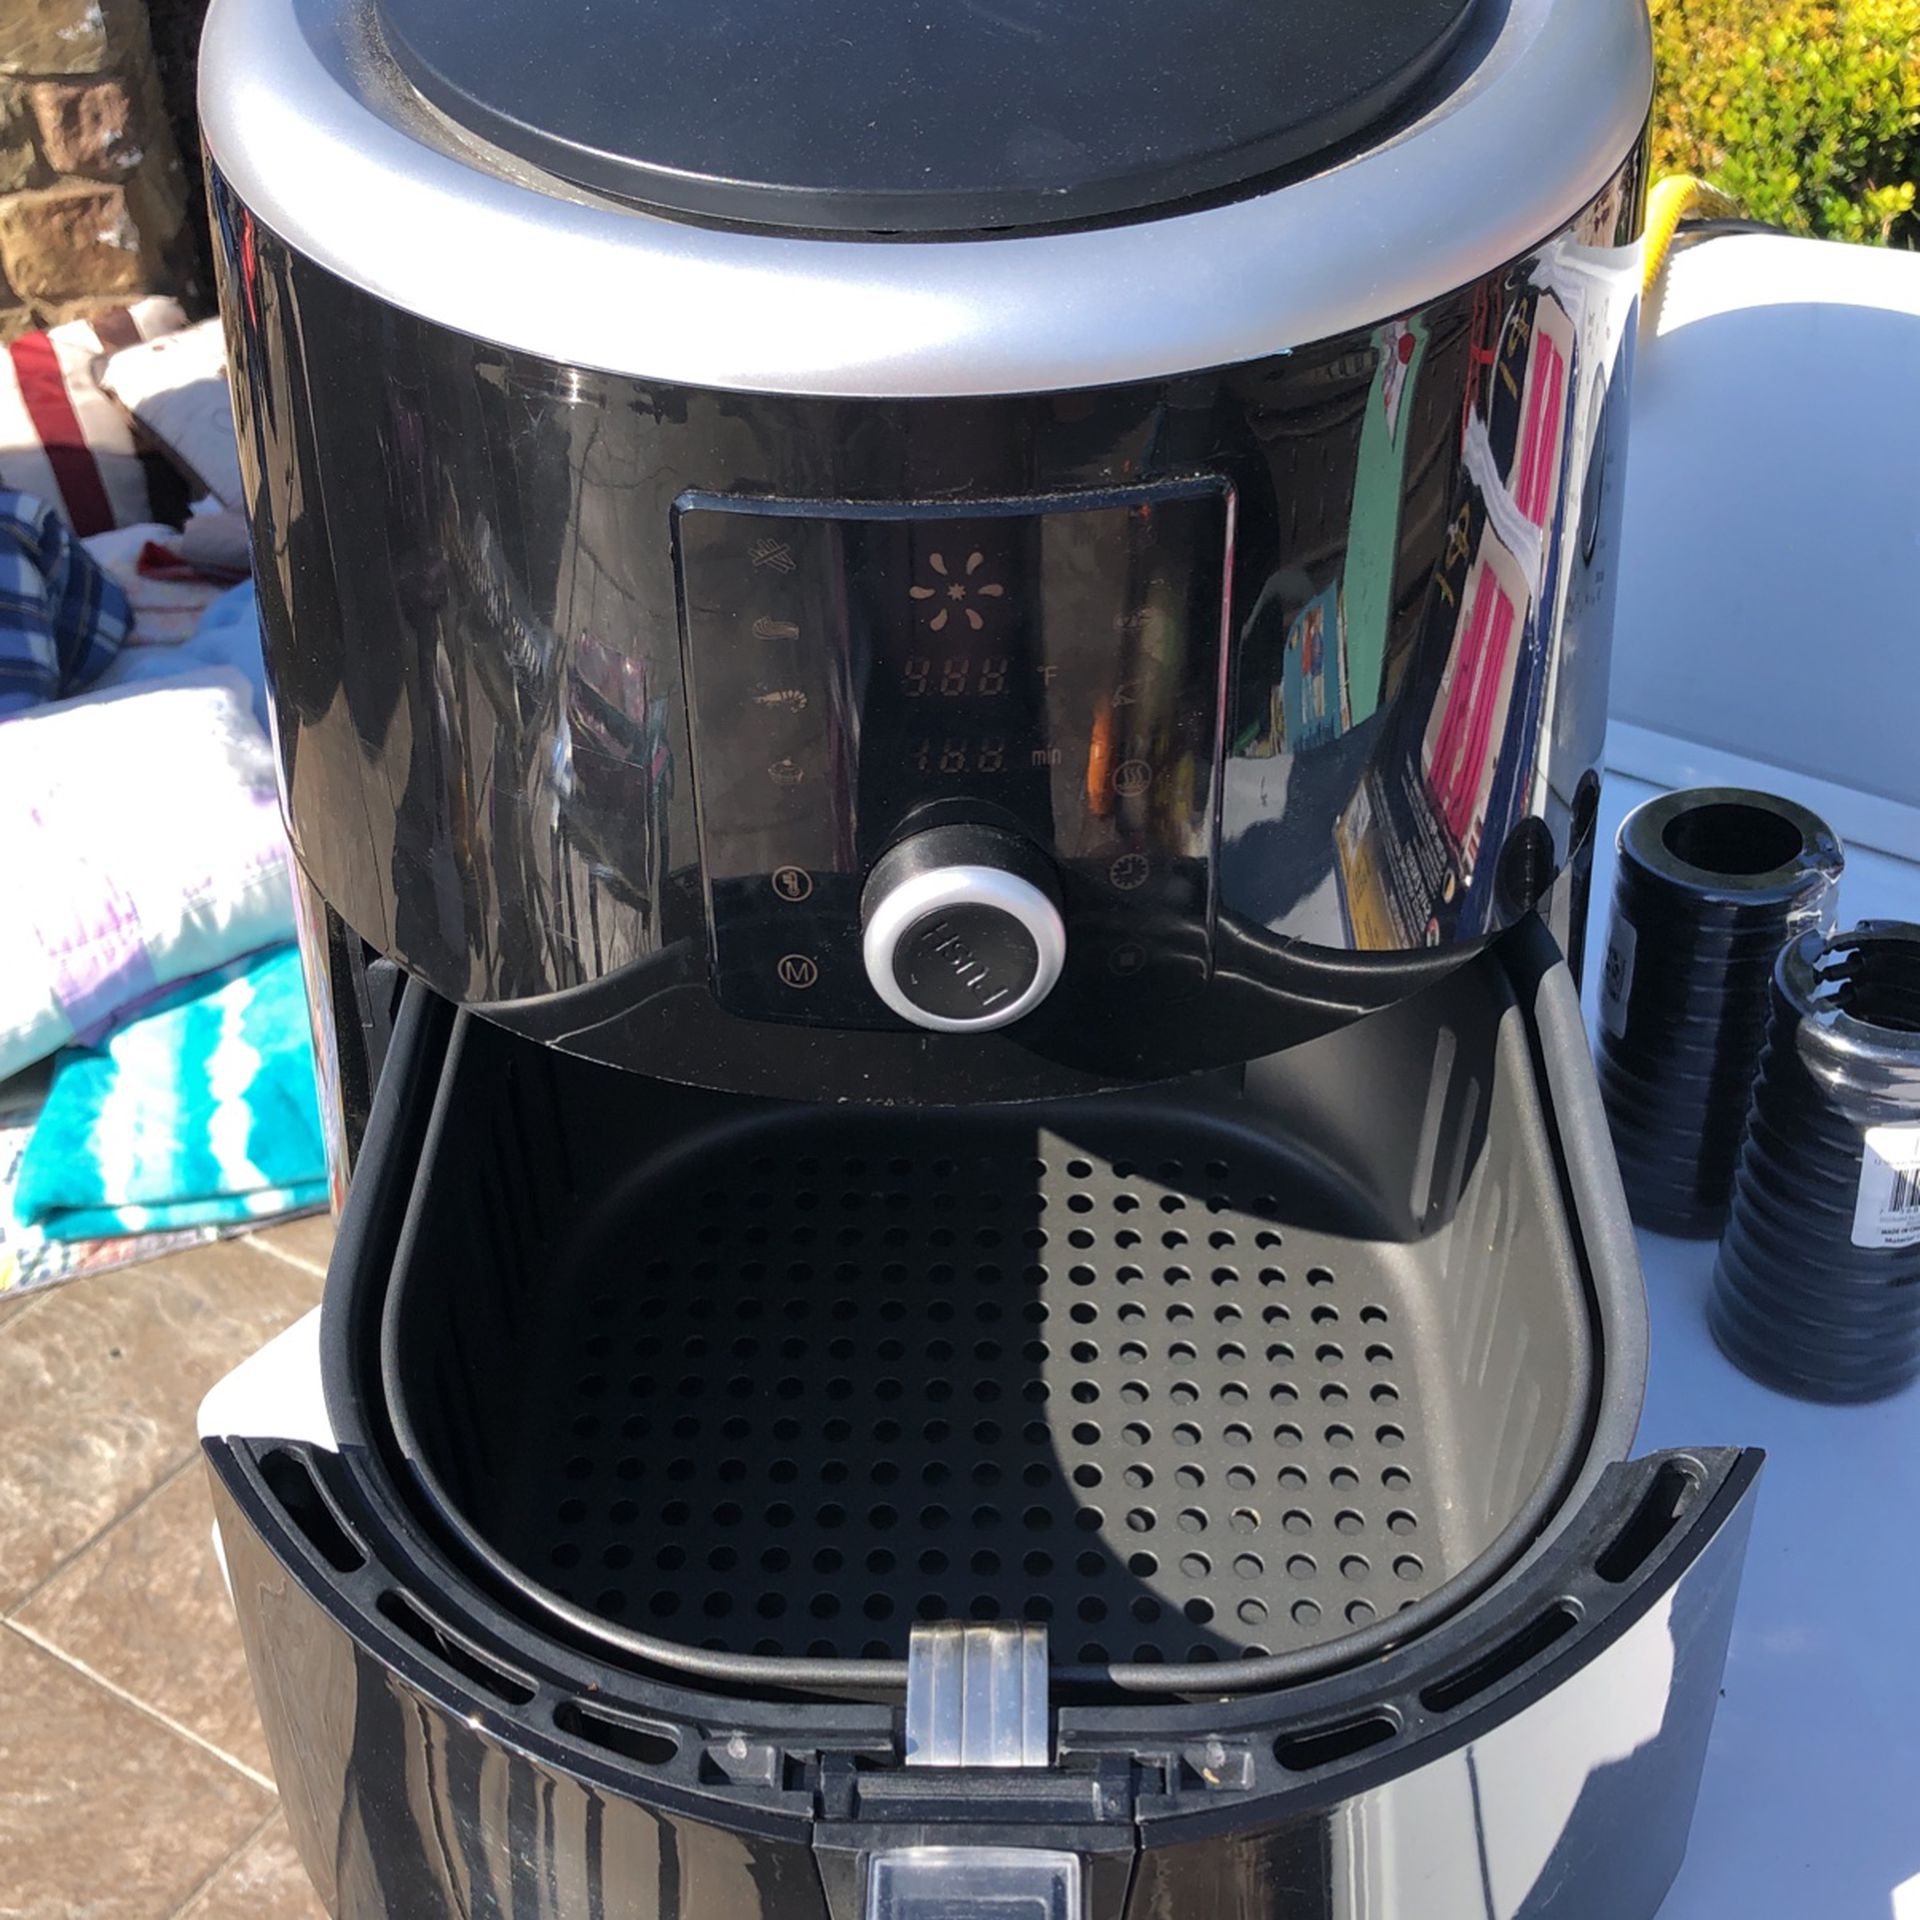 Rise By Dash Compact Air Fryer Oven for Sale in Sunland Park, NM - OfferUp